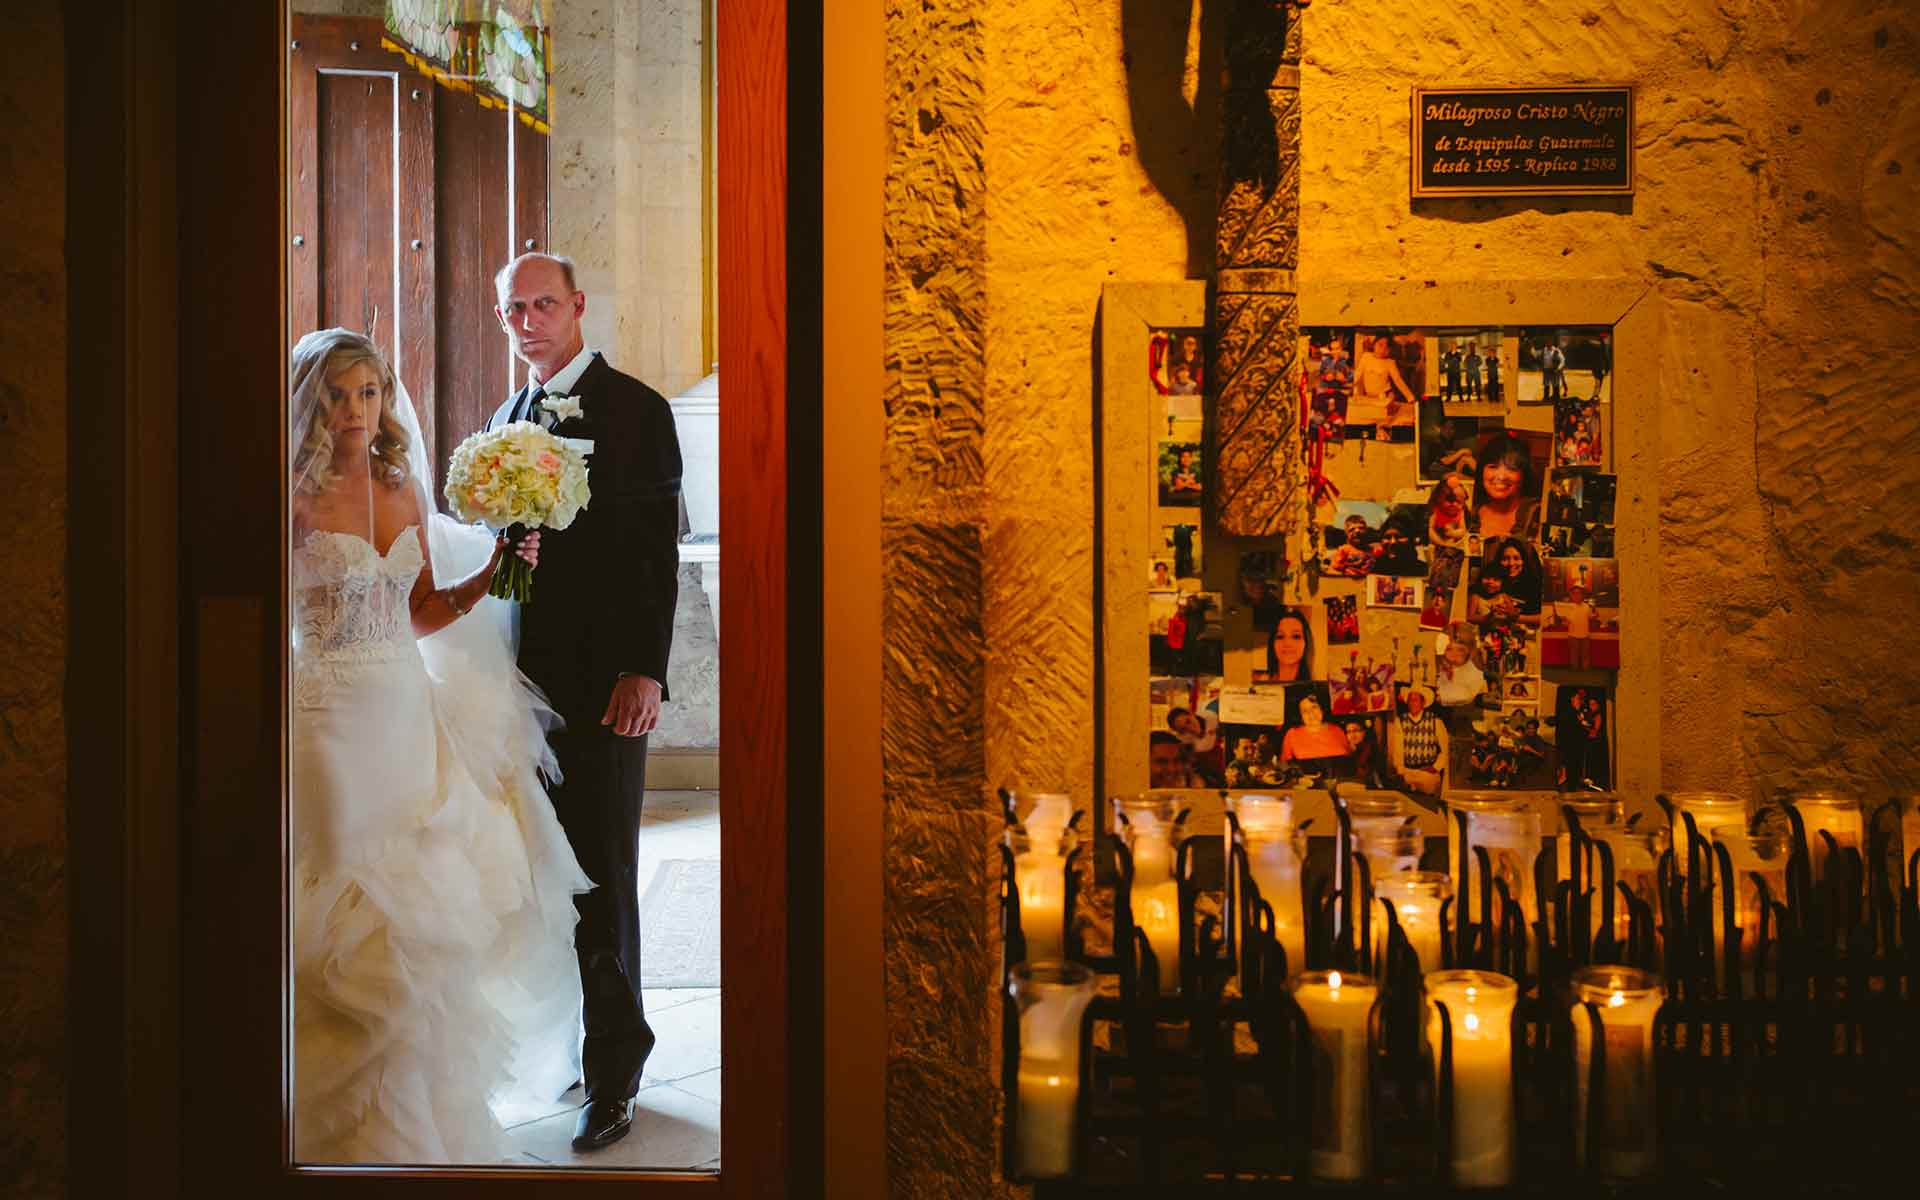 Bride and father await the signal to proceed to the start of the walk down the aisle at San Fernando Cathedral in San Antonio, Texas photographed with a Leica M by Philip Thomas